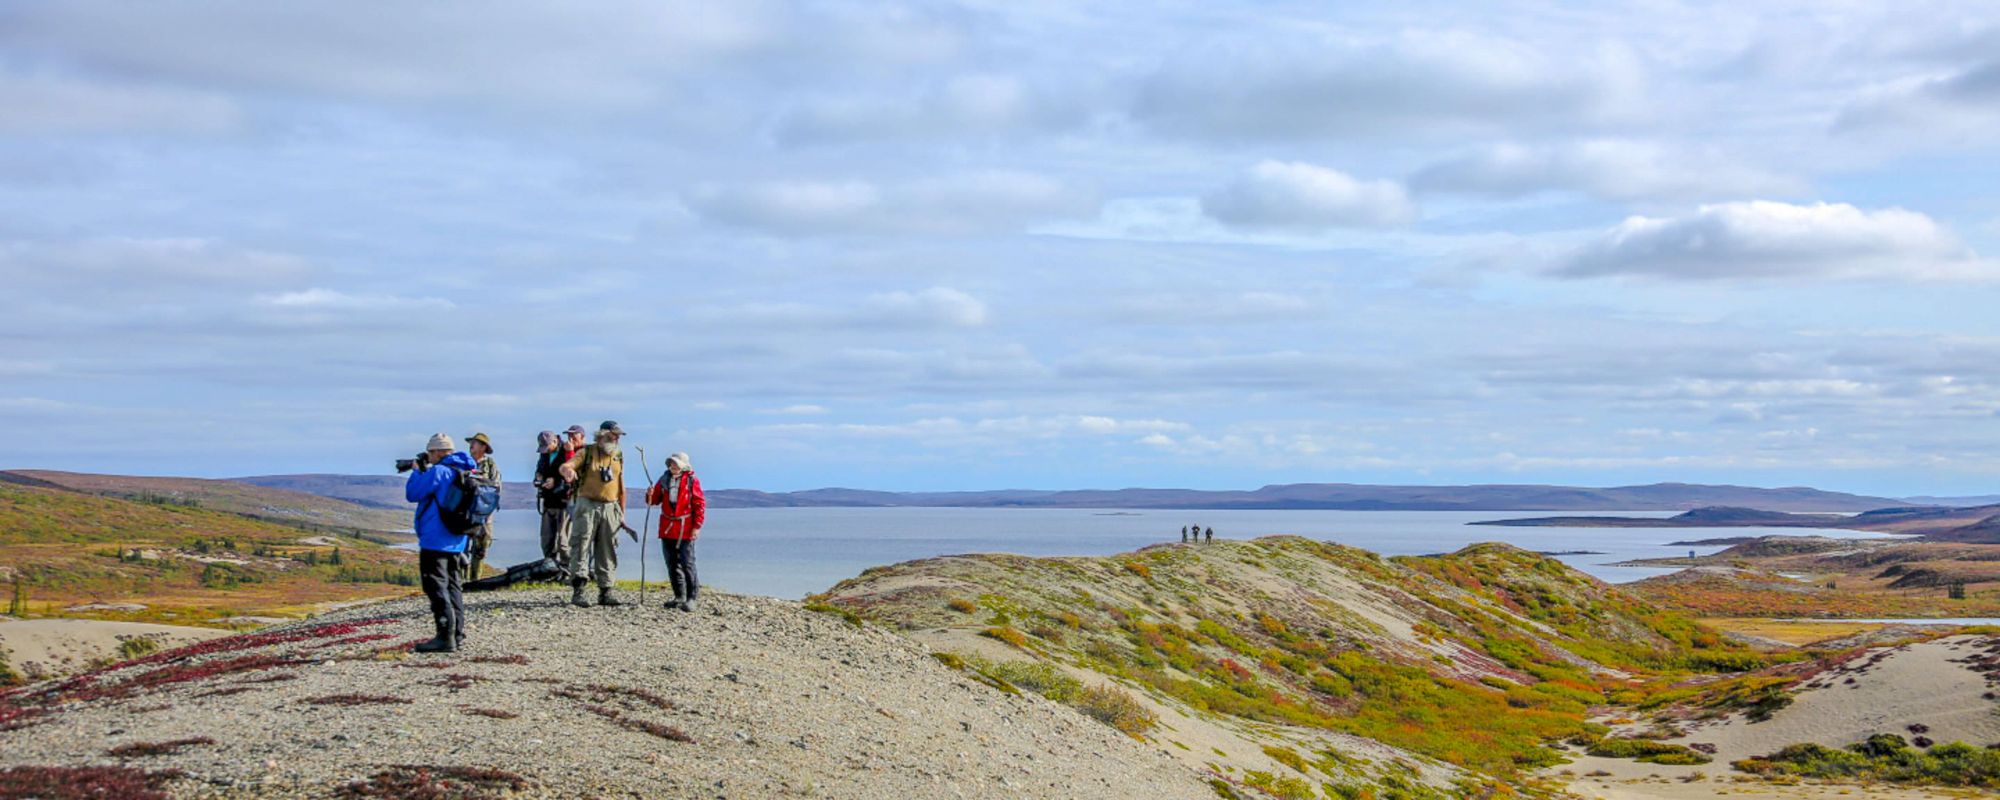 People on sand esker taking photos and over looking Point Lake and the barrens after hiking on a sand esker